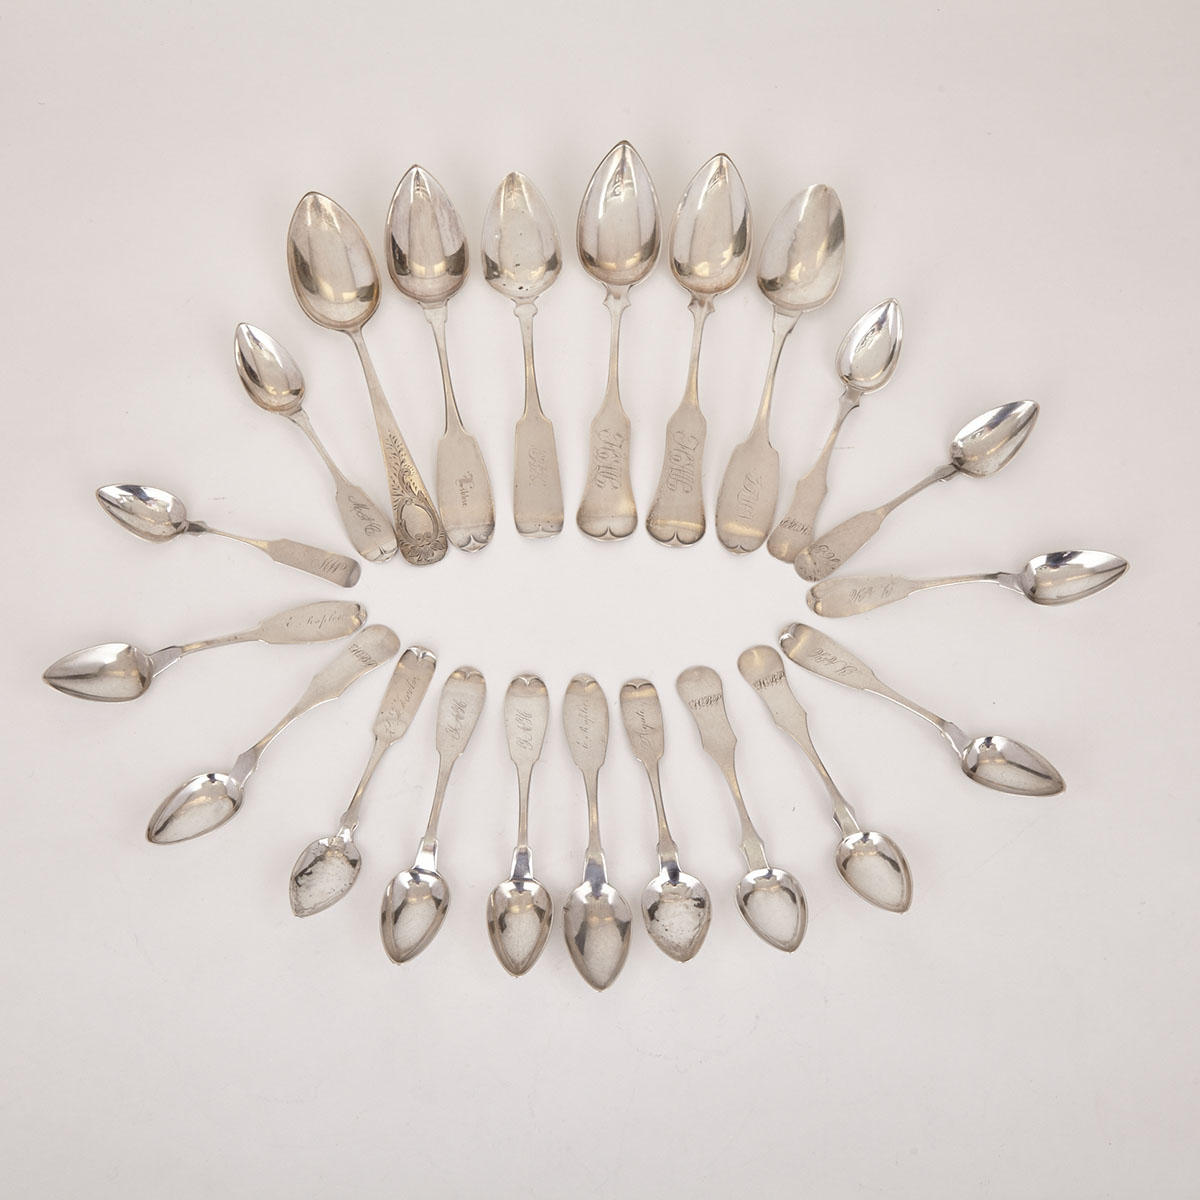 Collection of 21 Mainly American Coin Silver Spoons, 19th century